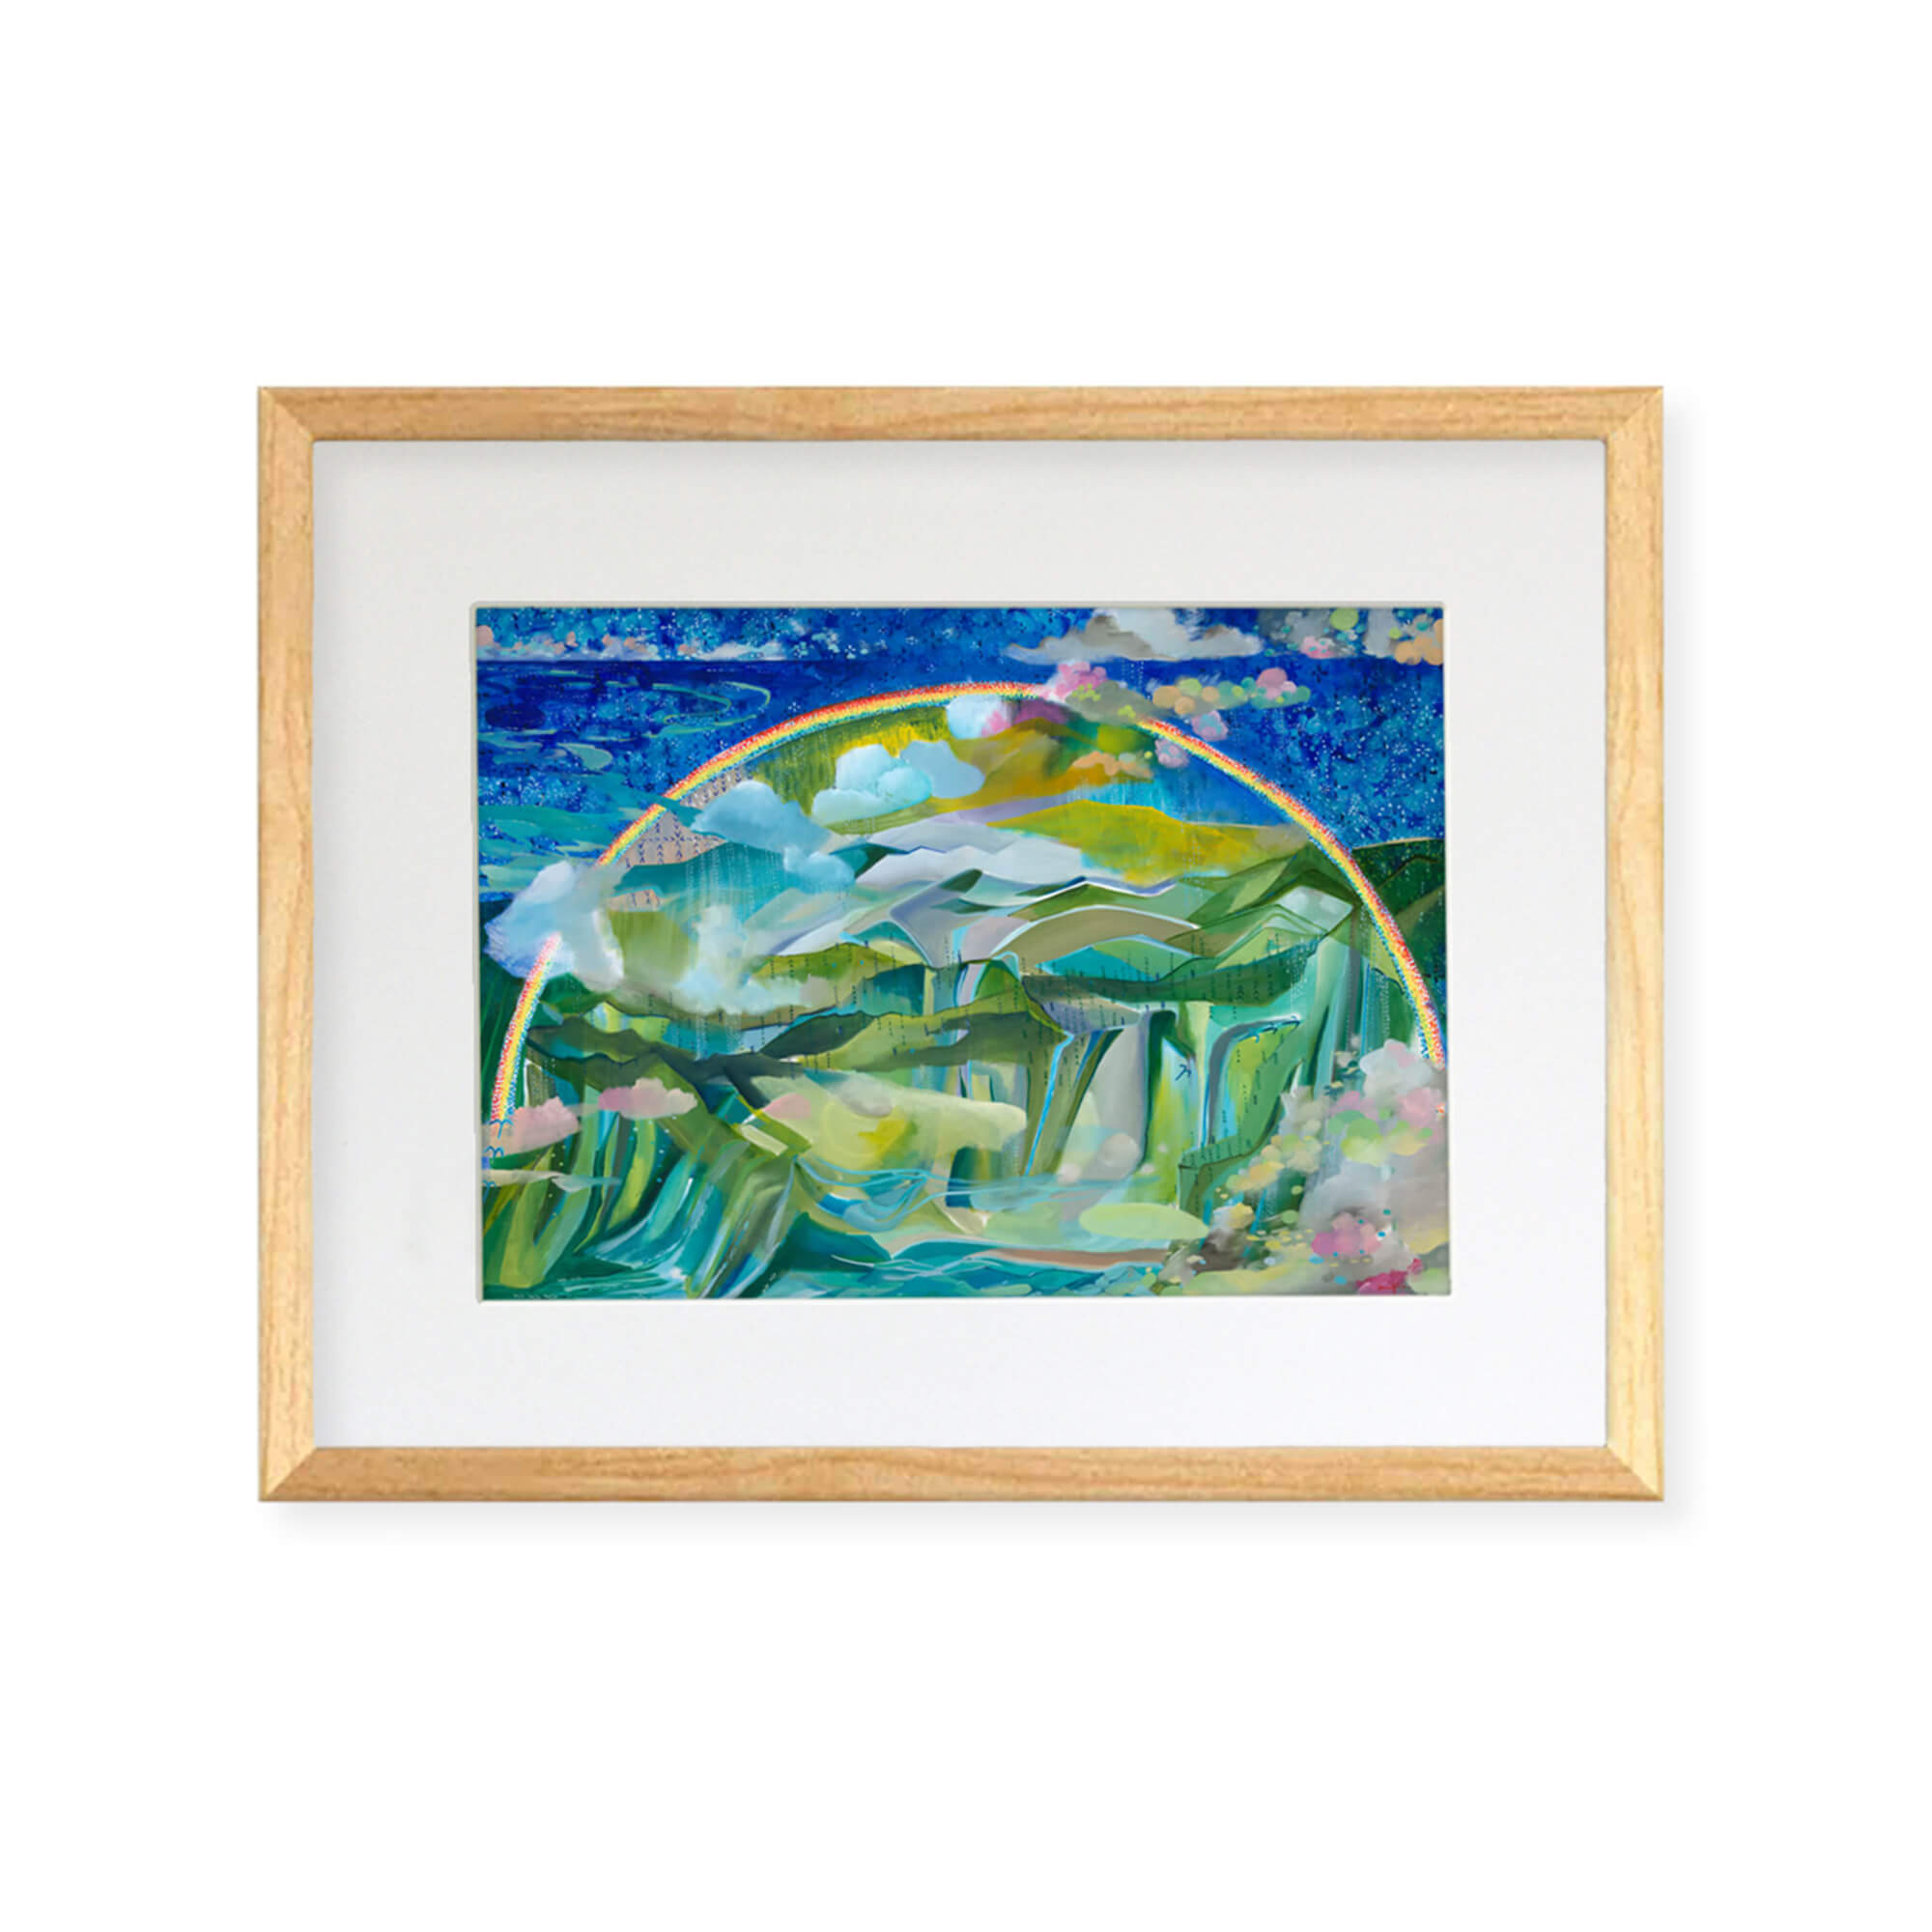 Framed matted art print of an abstract landscape with a rainbow over the mountains by Hawaii artist Saumolia Puapuaga 